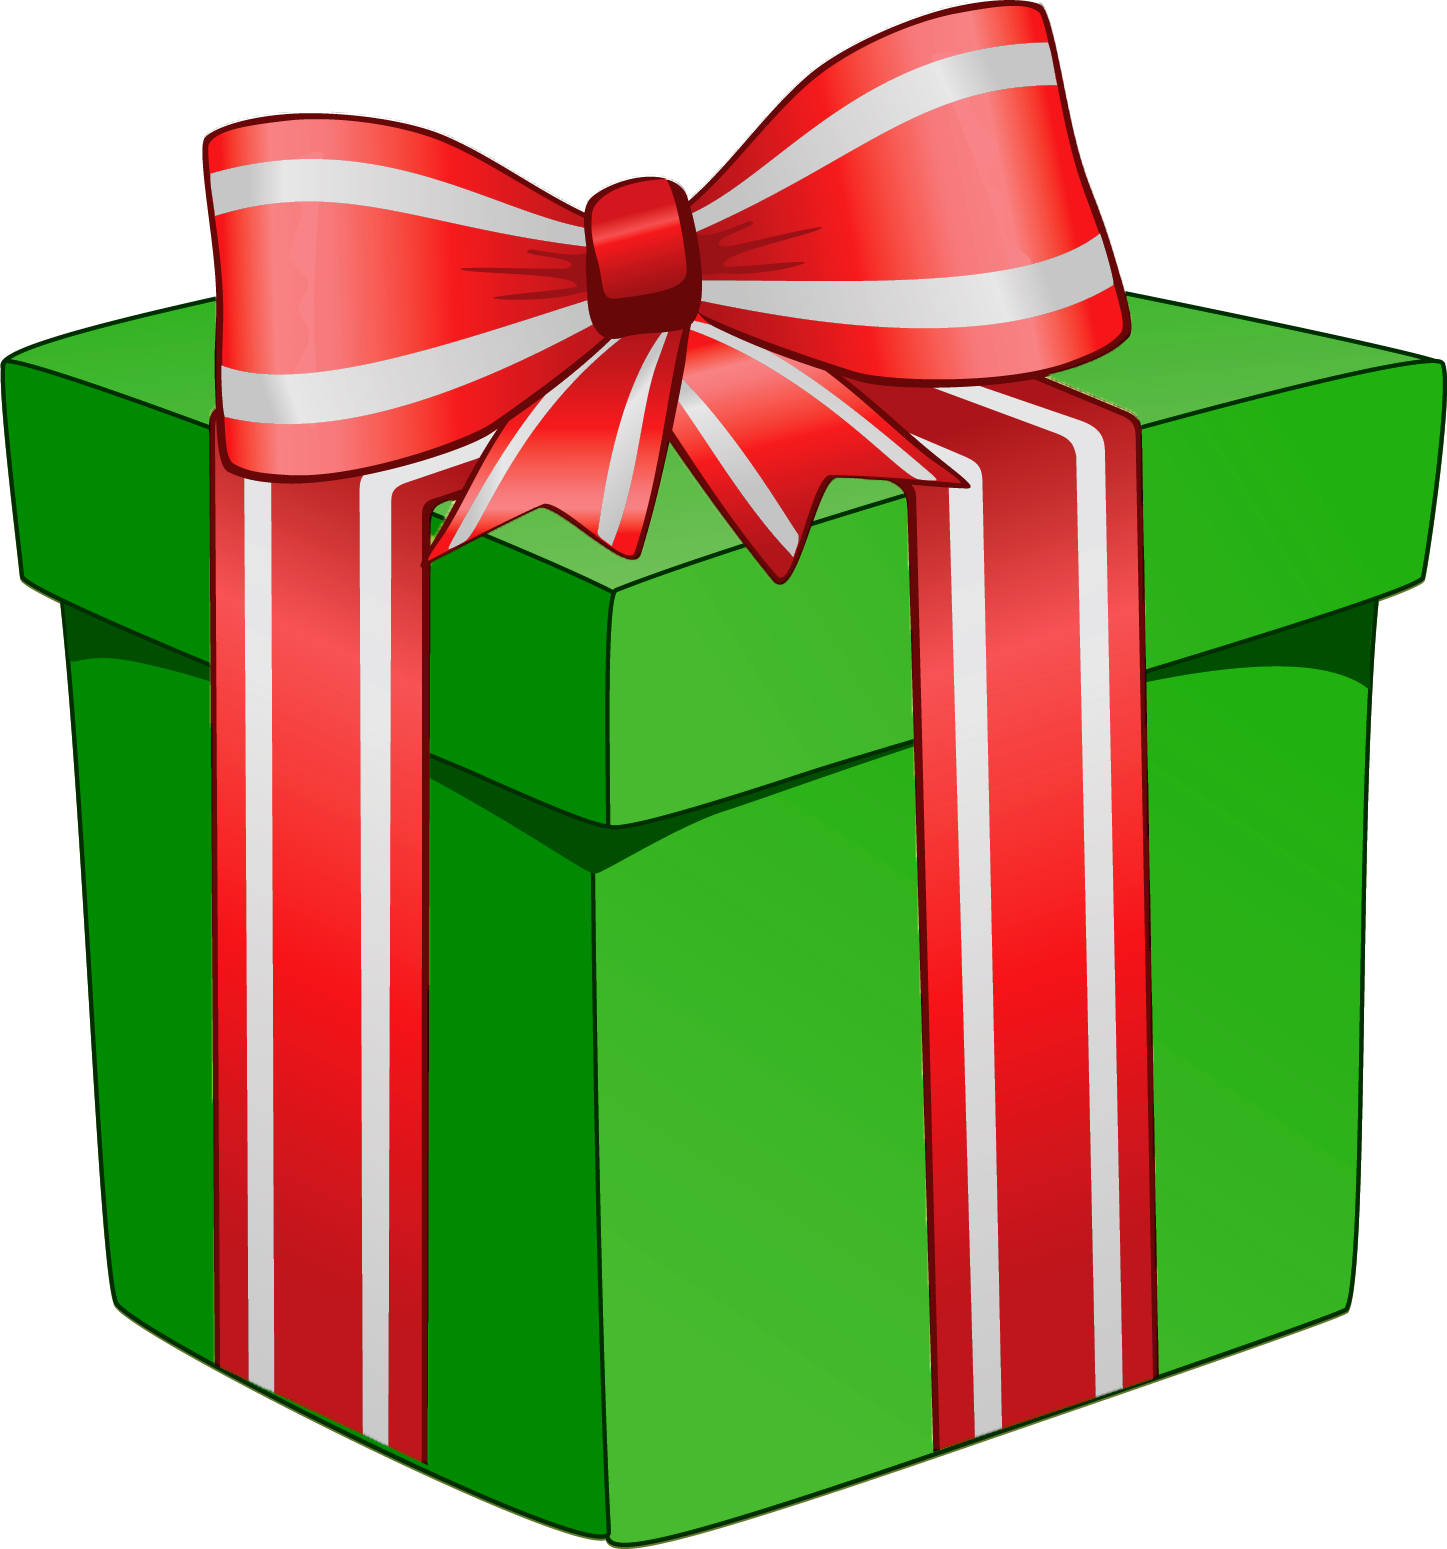 Christmas gift boxes clipart